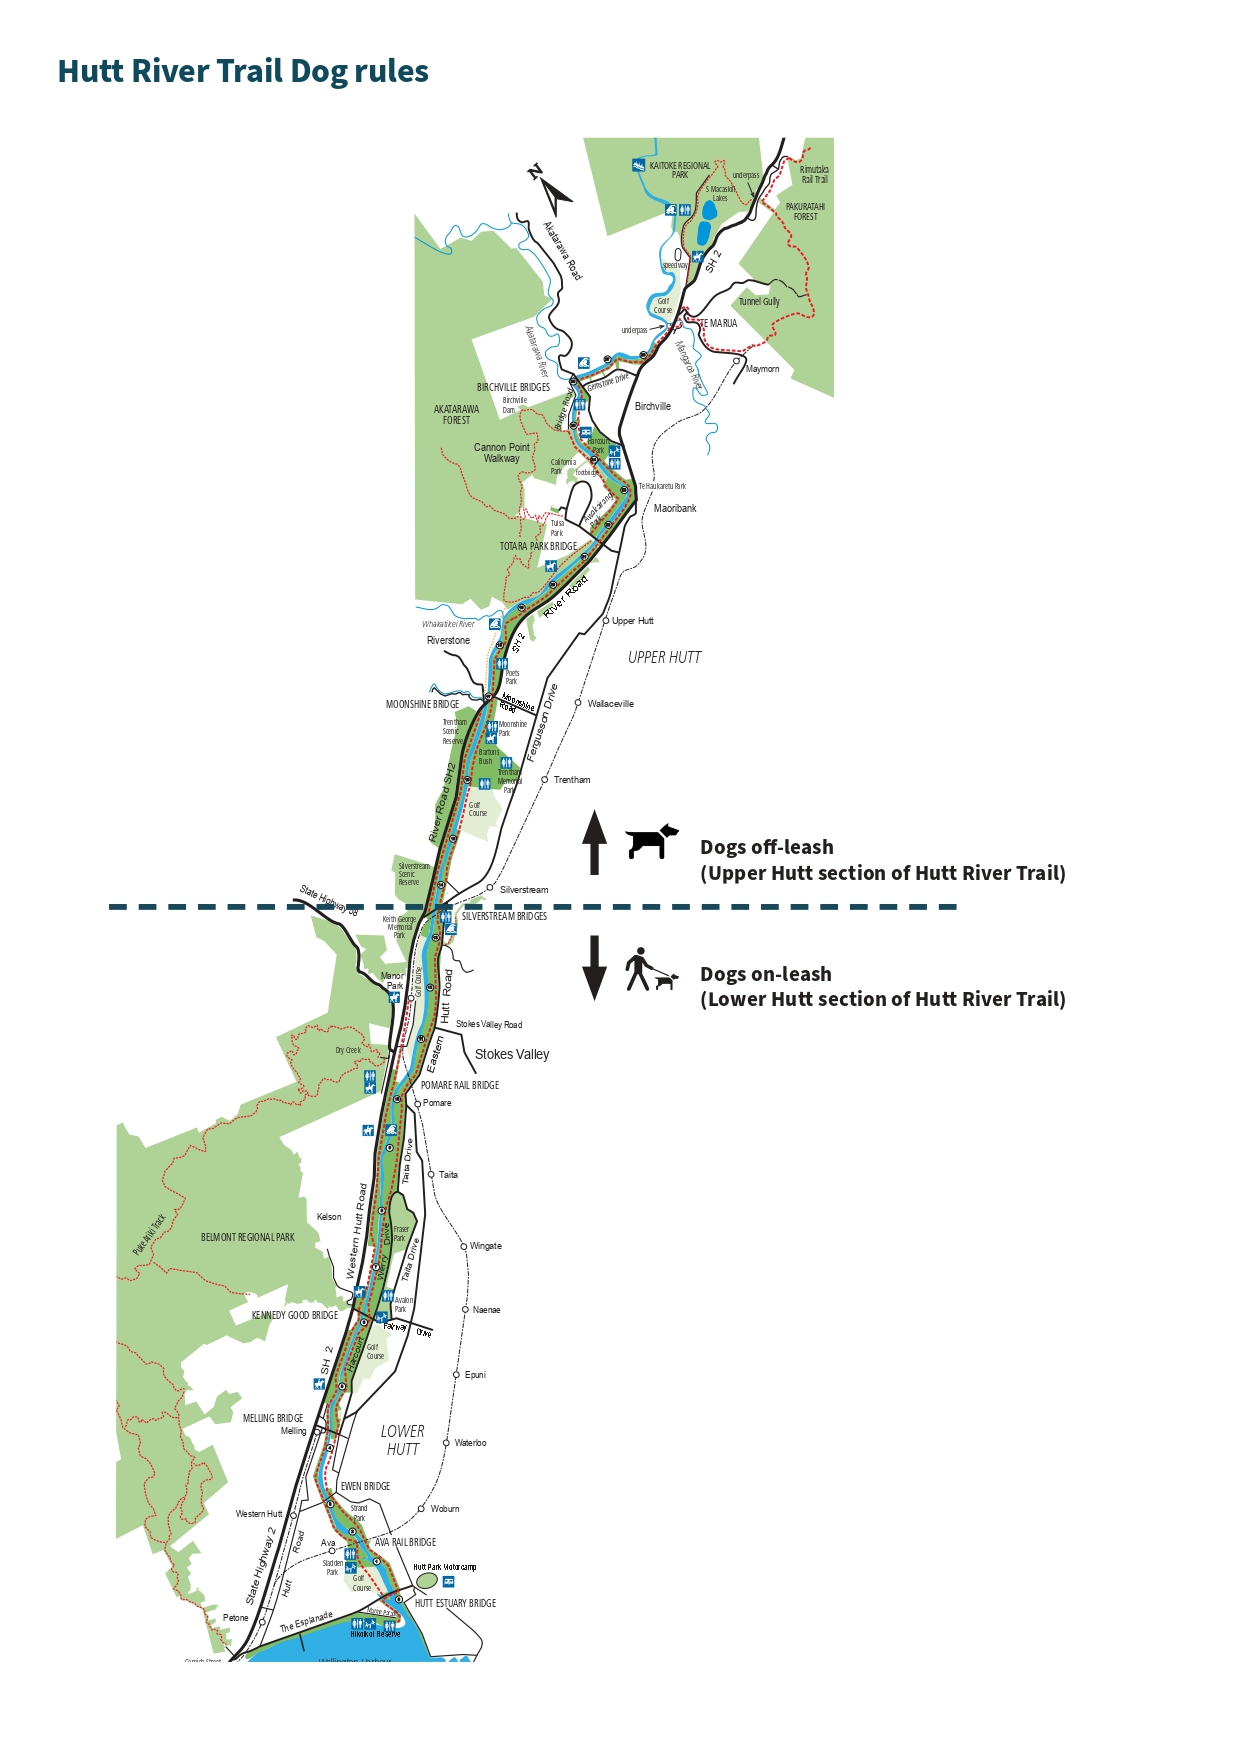 Map showing where dogs are and aren't allowed on the Hutt River Trail